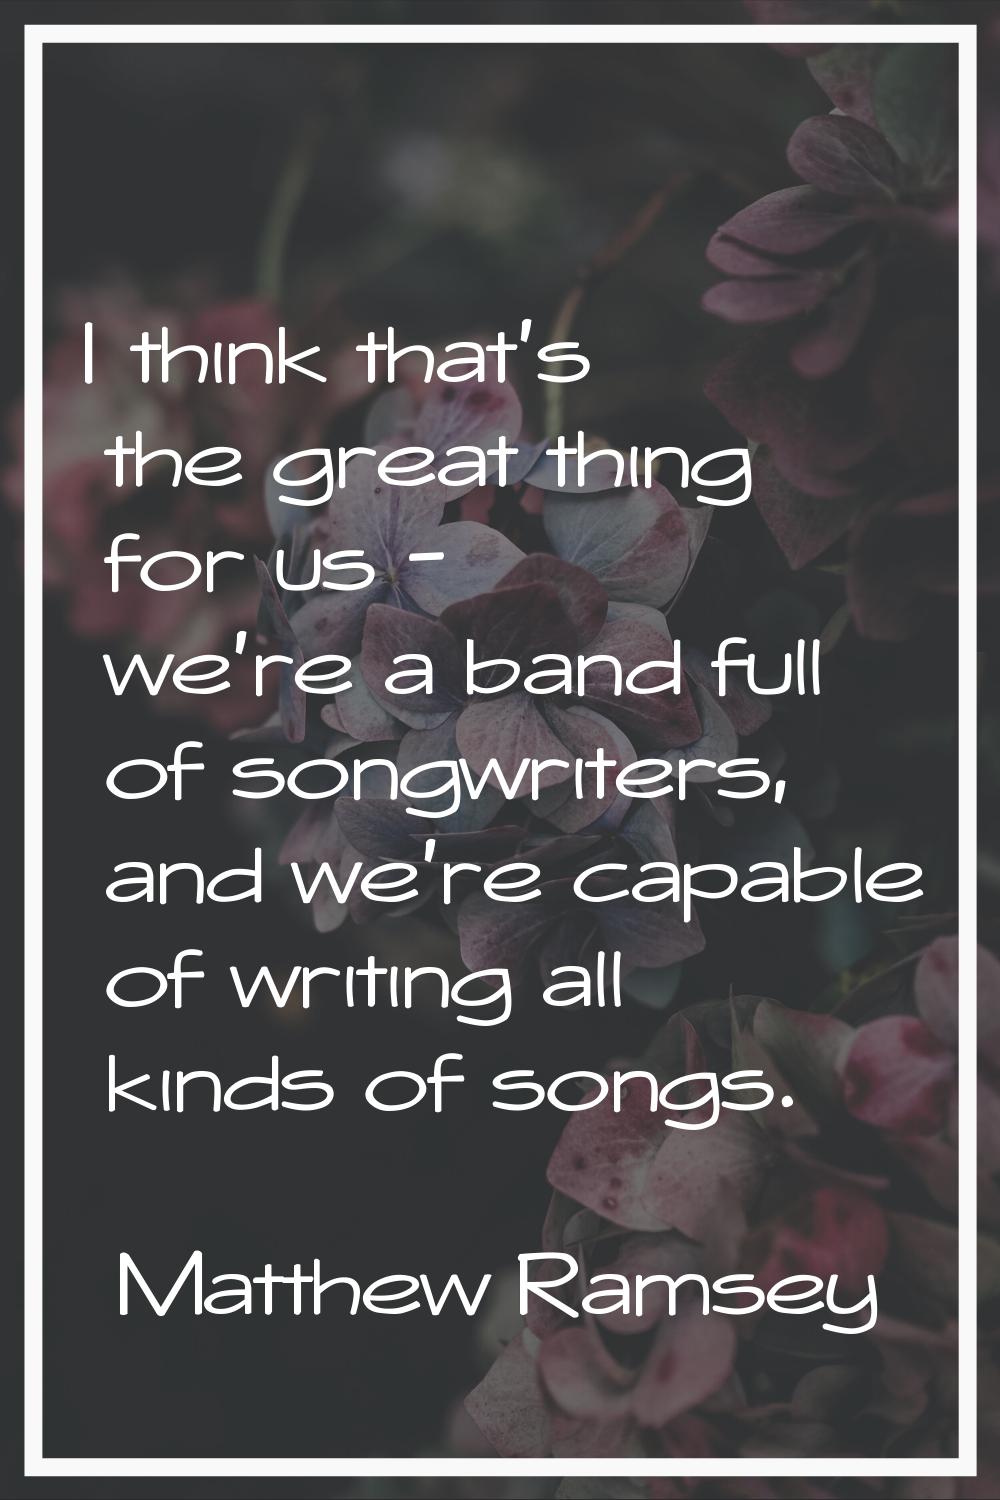 I think that's the great thing for us - we're a band full of songwriters, and we're capable of writ